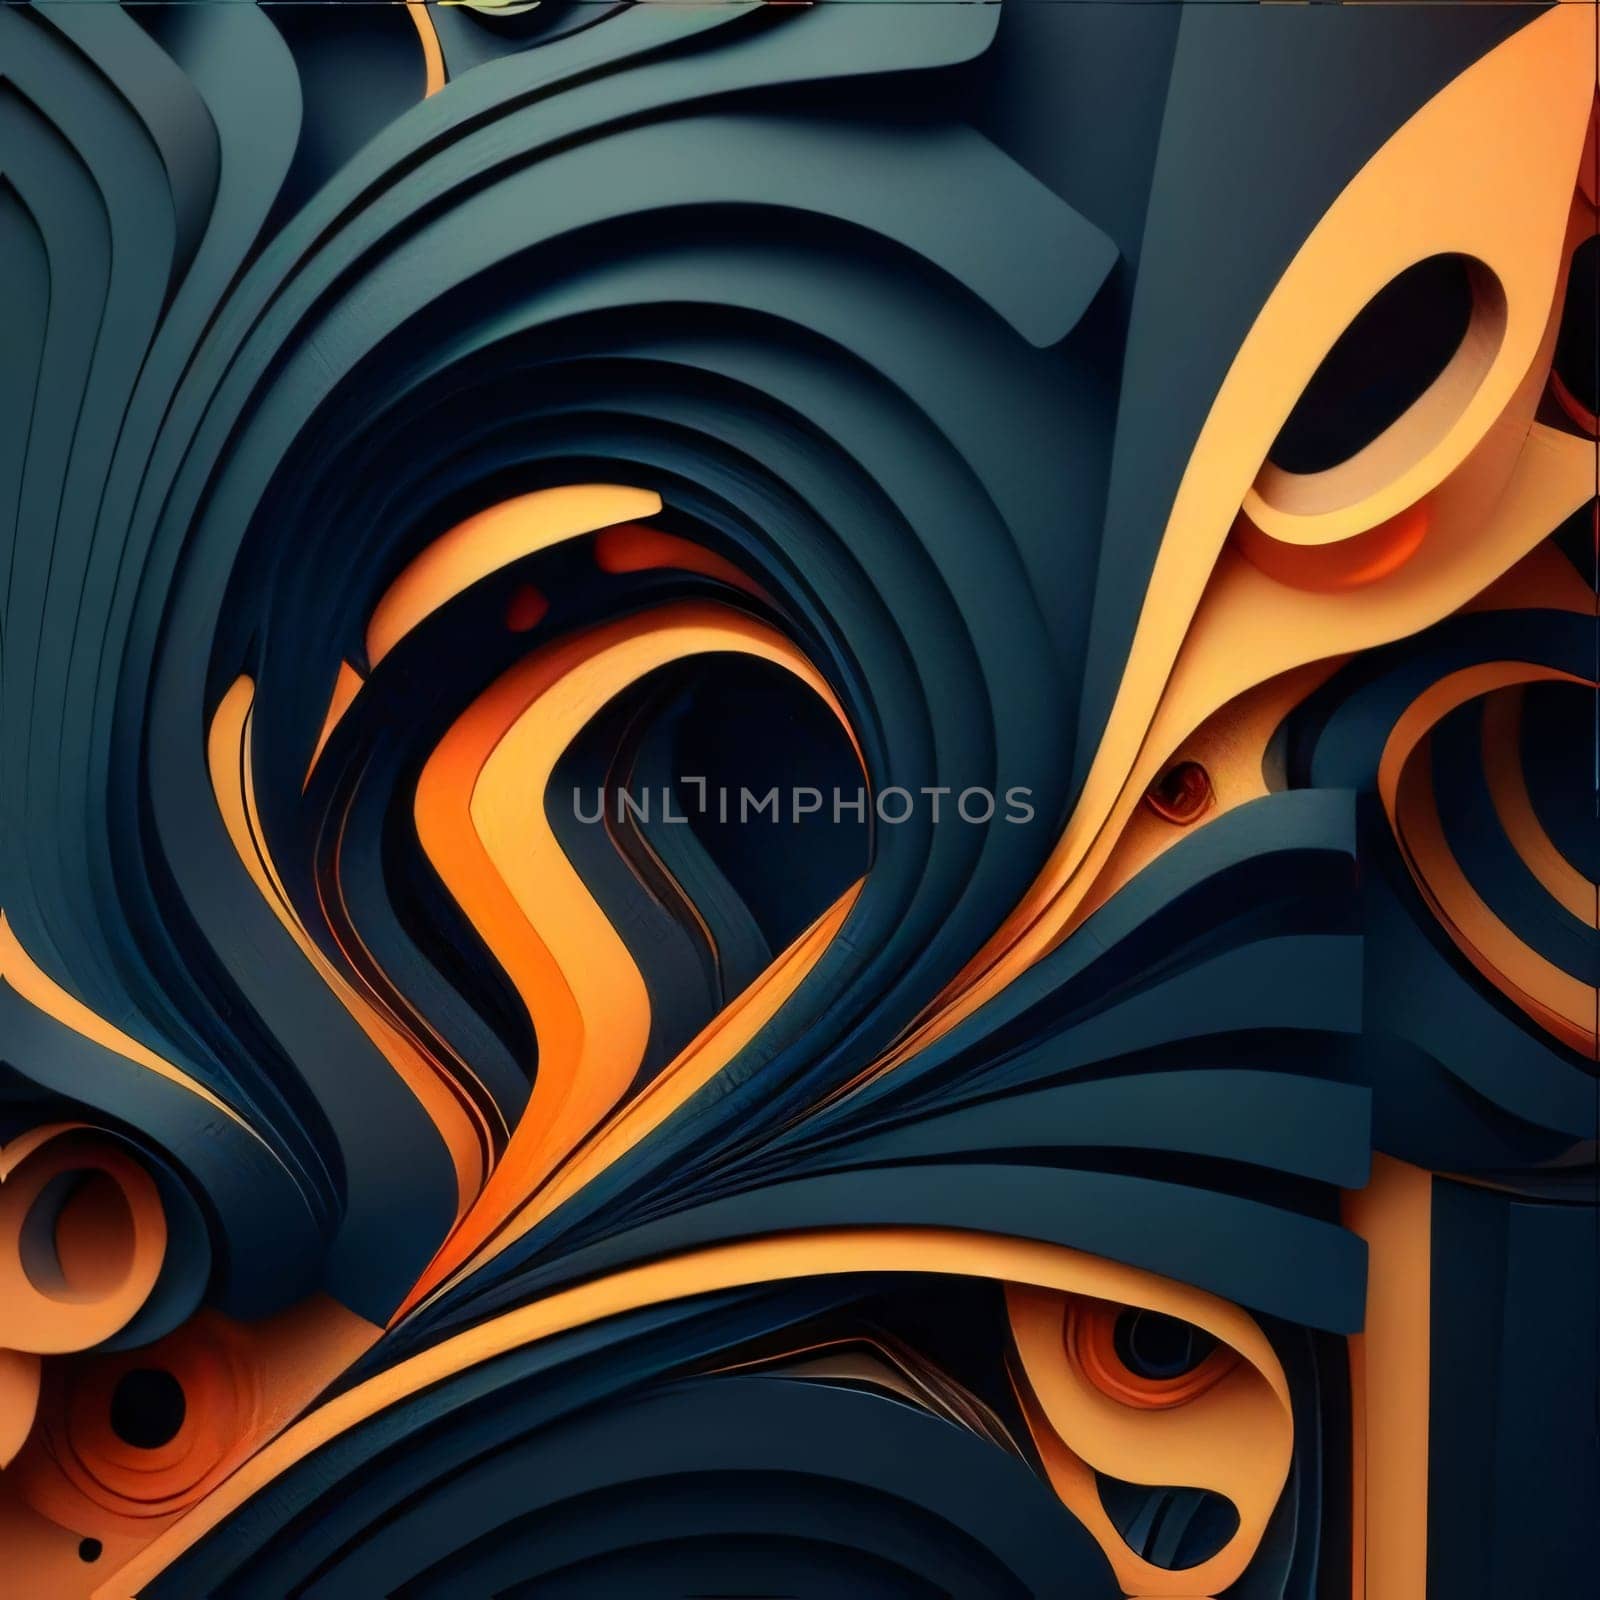 Abstract background design: 3d render, abstract background with wavy layered paper layers in orange and blue colors